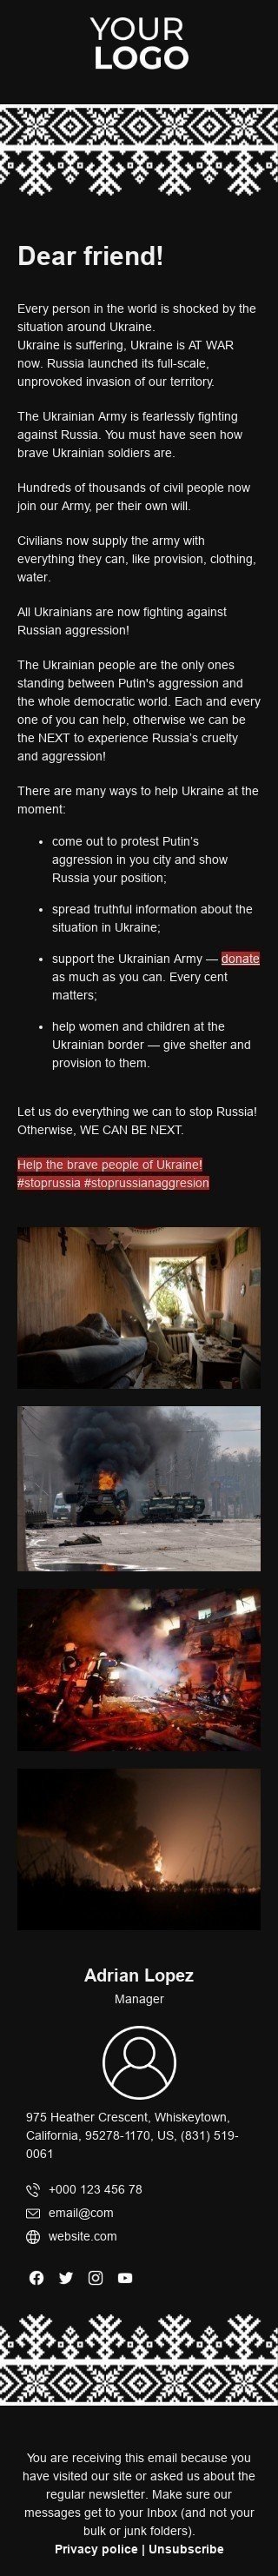 The "Let's Stop this War Together: Spread the word about this tragedy" email template Visualizzazione mobile